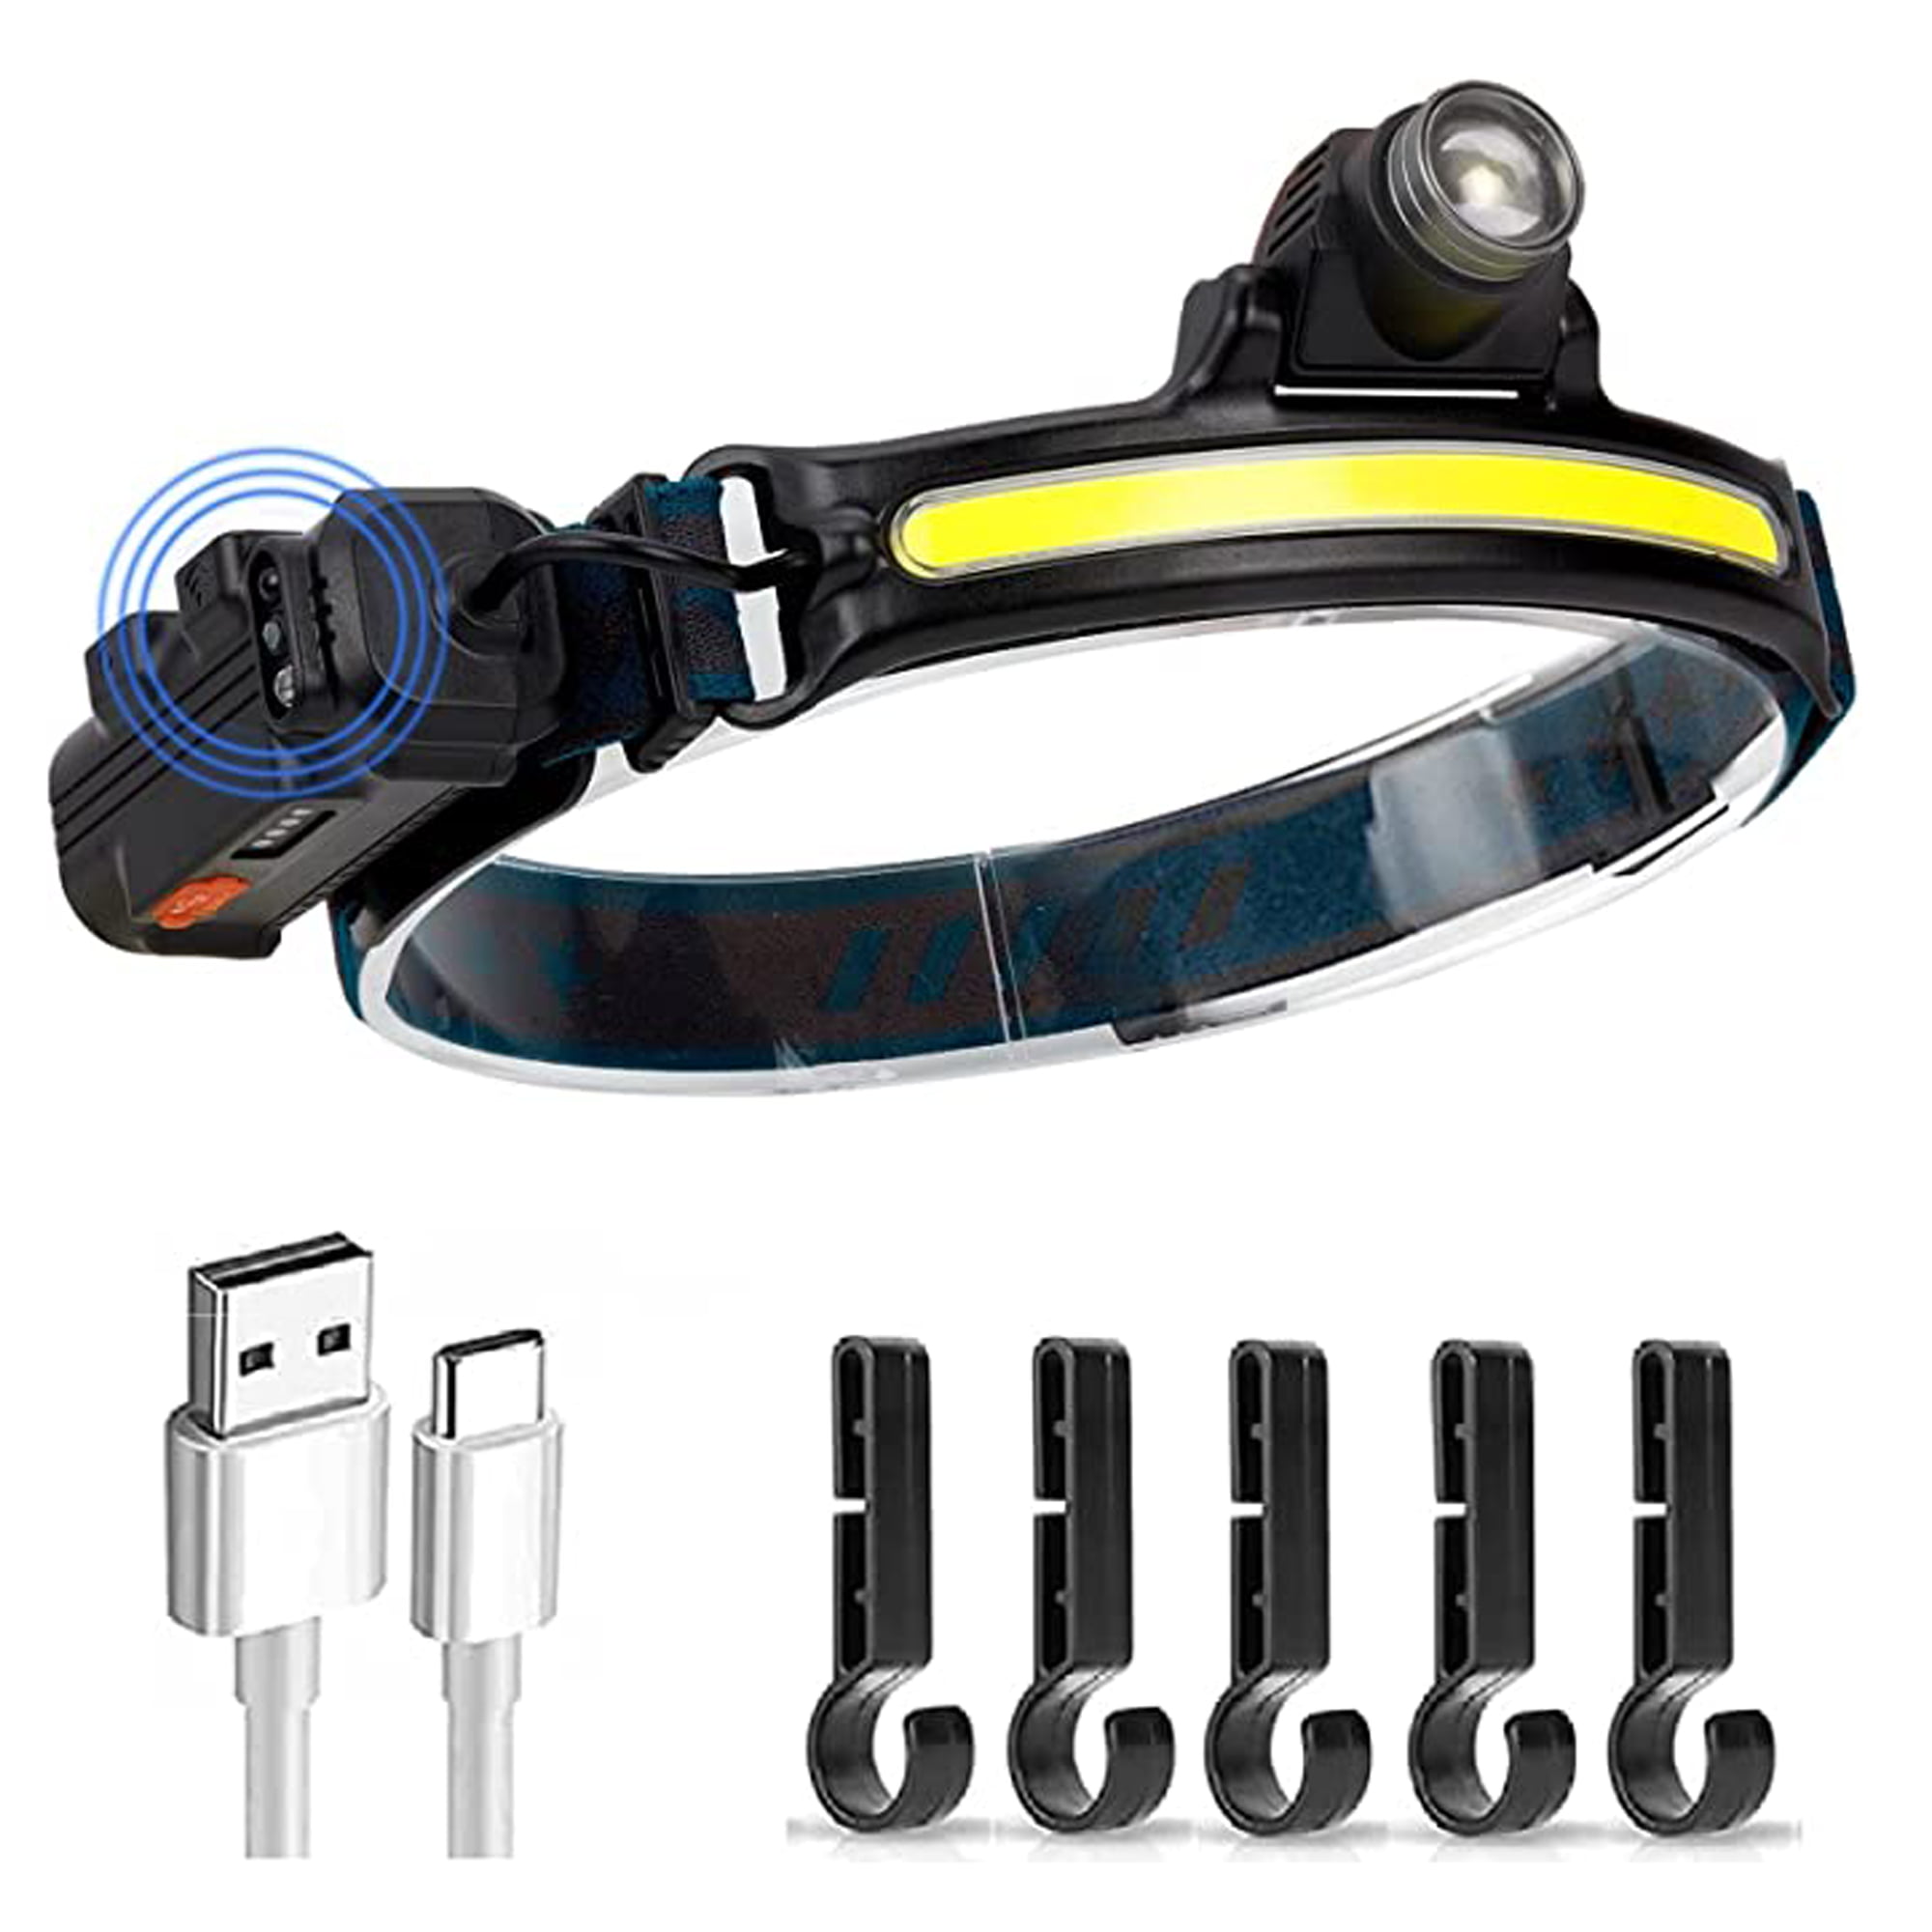 LED Rechargeable Headlamp,Spotlight Head Lamp with Motion Sensor and 5  Modes 350 Wide Beam 5 Modes Headlight Flashlight for Camping Running  Outdoors 1 Pack/2 Pack 